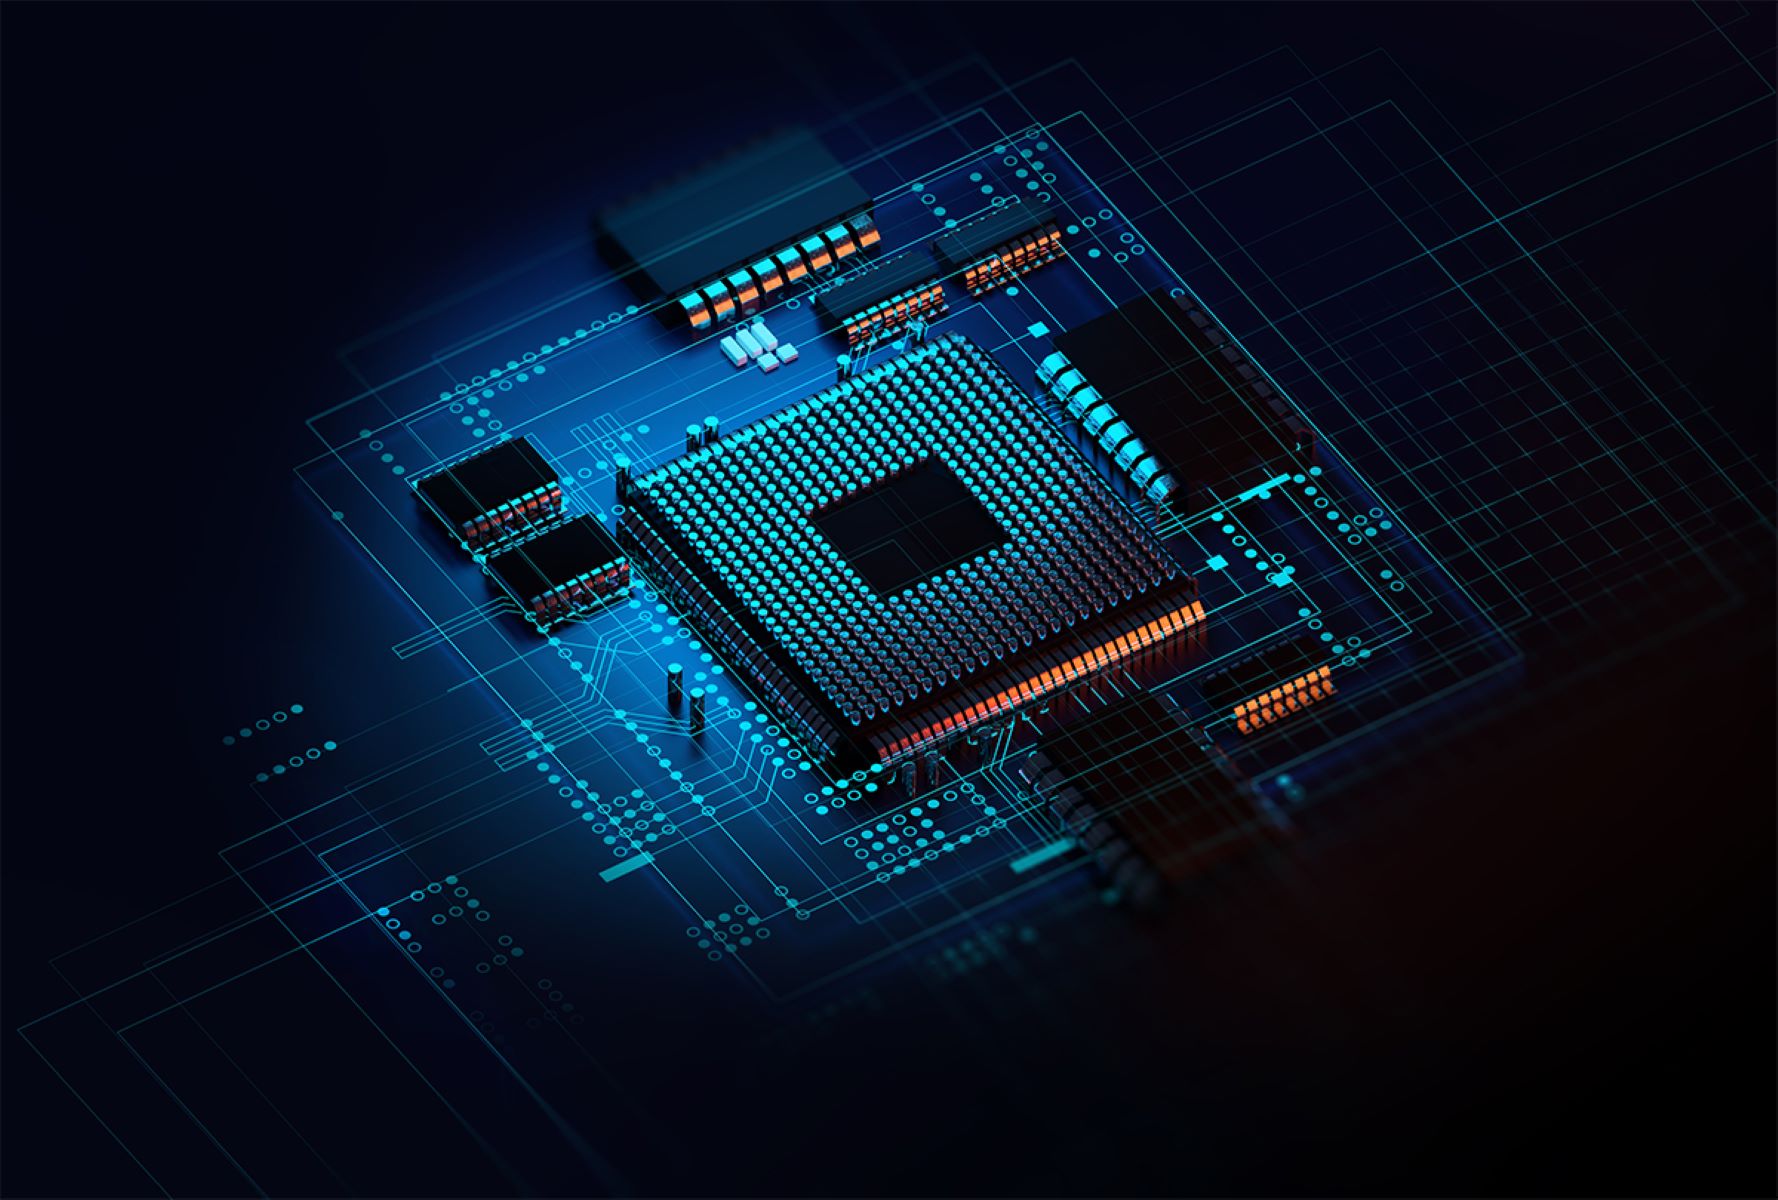 Who Produces The Internet Of Things Chip